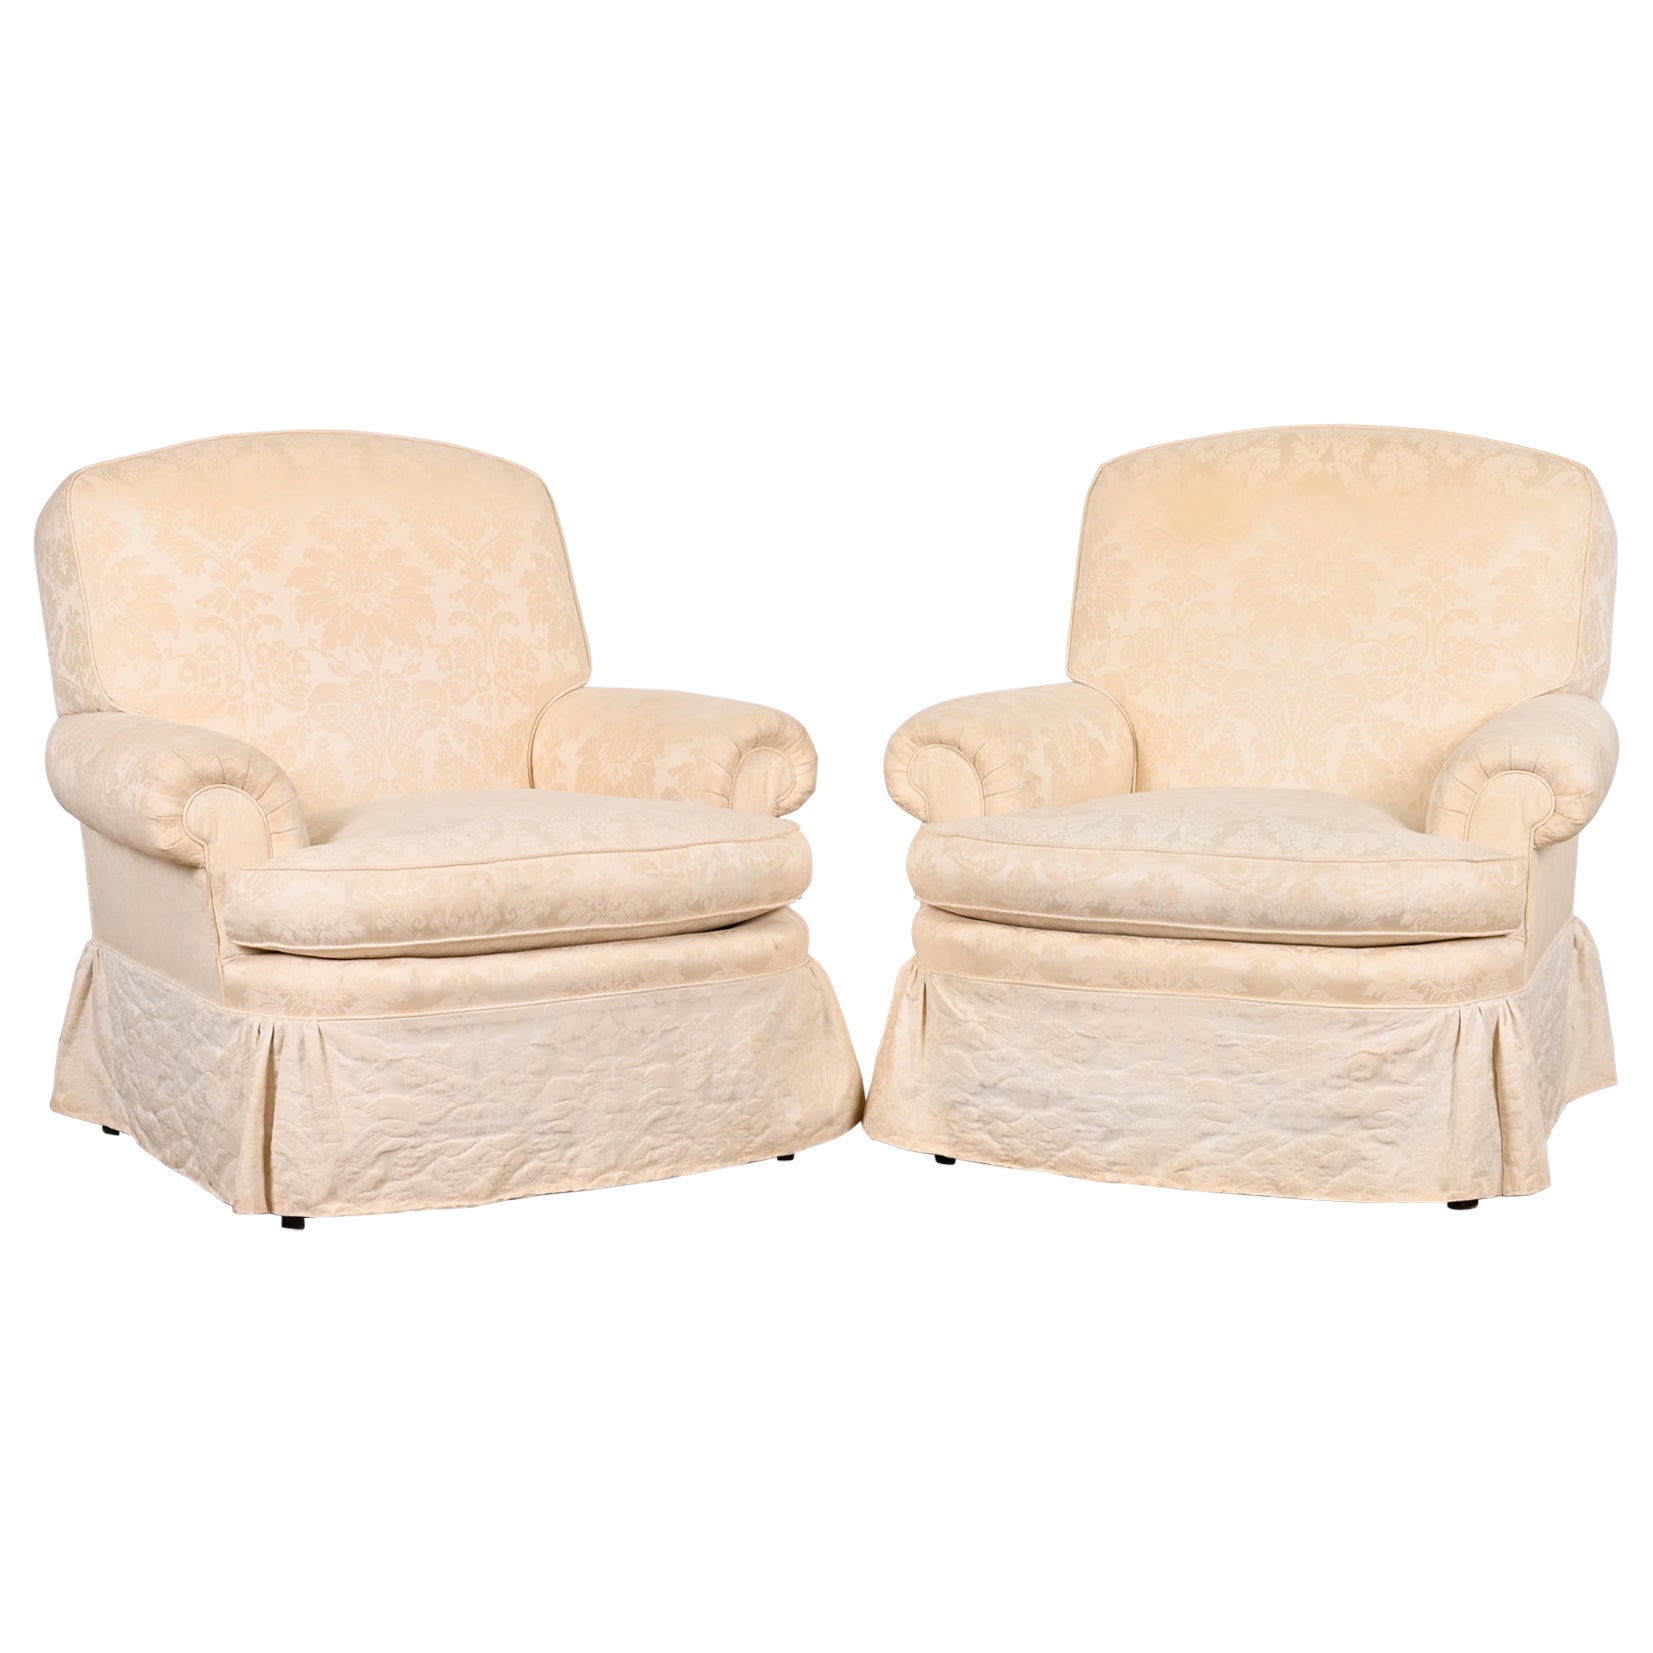 Baker Furniture Damask Upholstered Lounge Chairs, One Chair